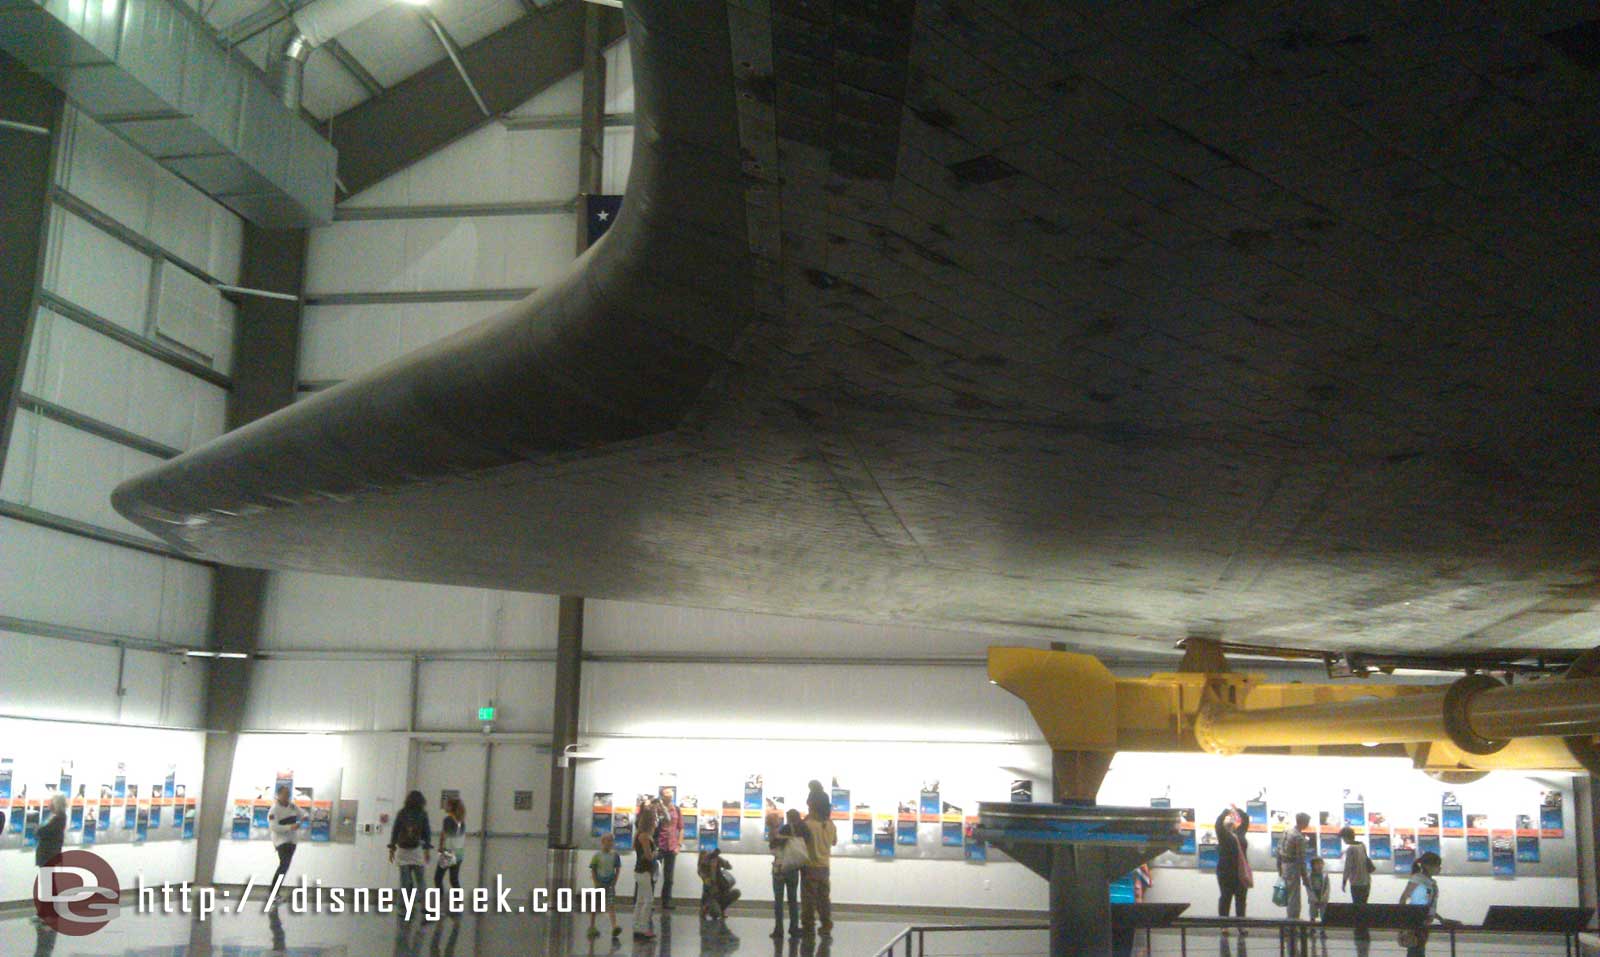 Walking under the Endeavour